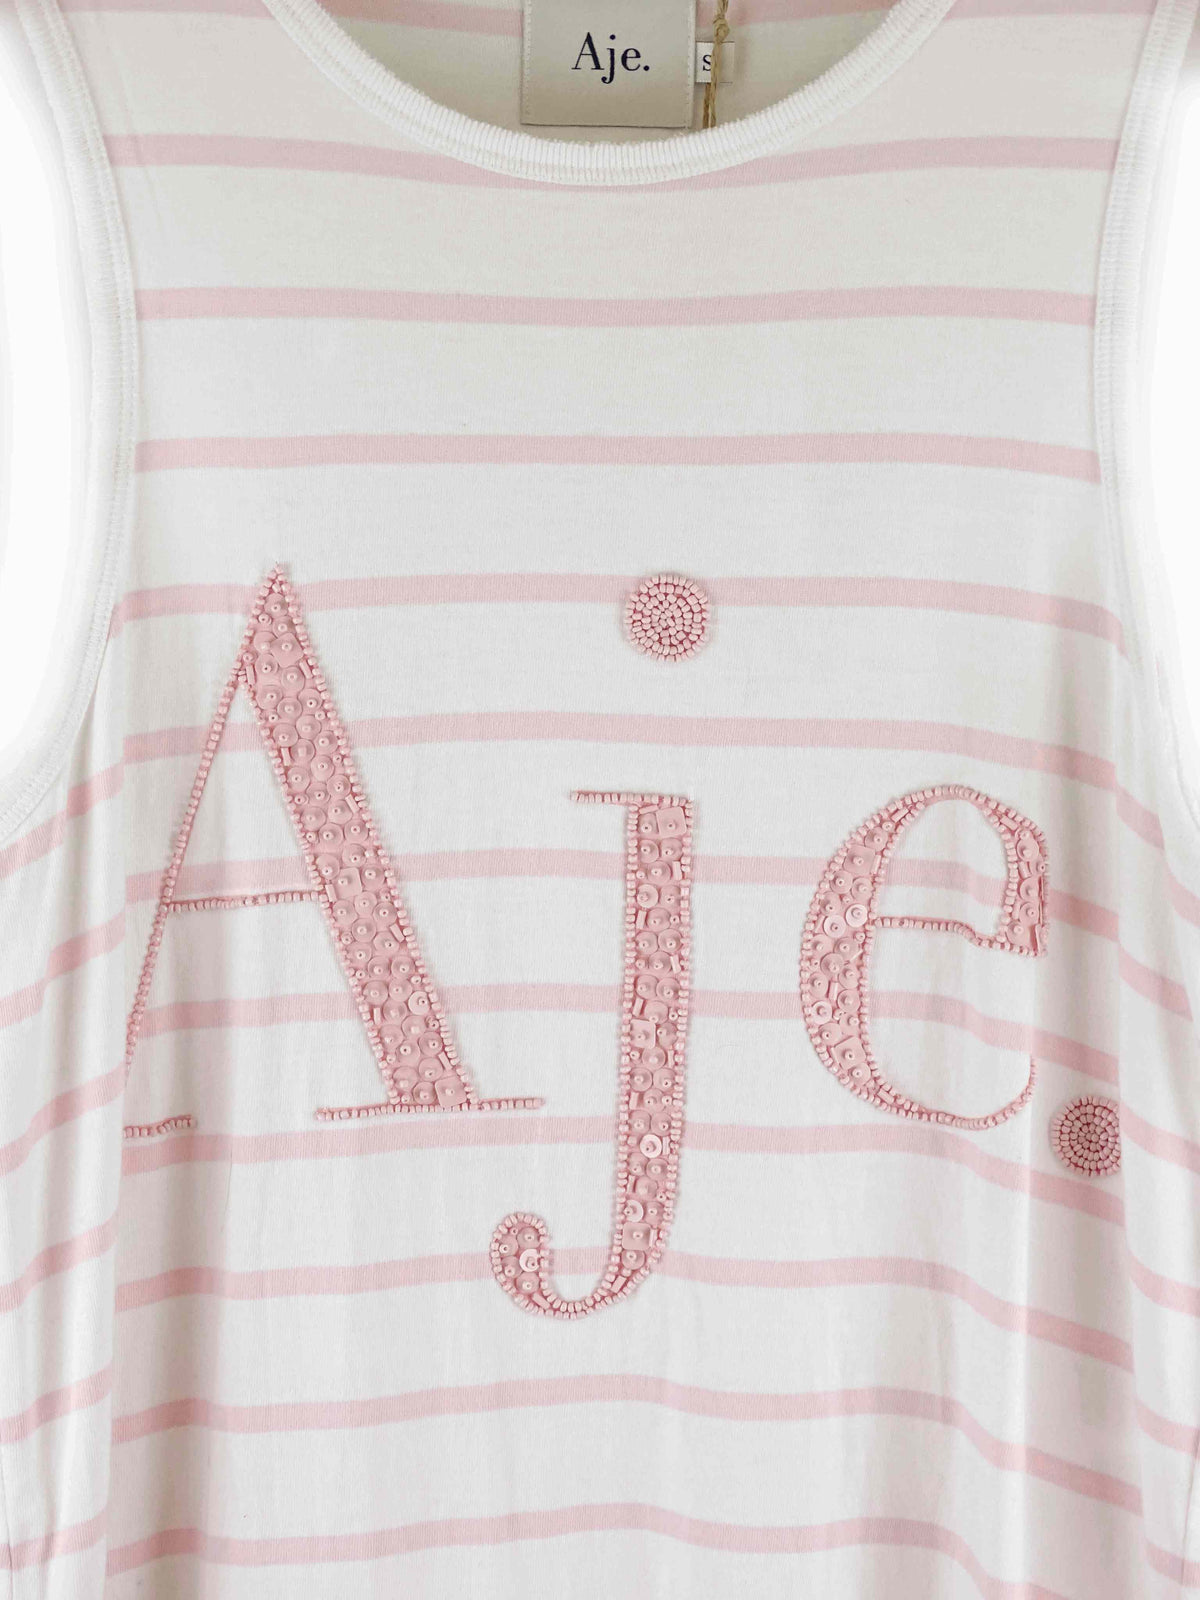 Aje White and Pink Beaded Sleeveless Top S